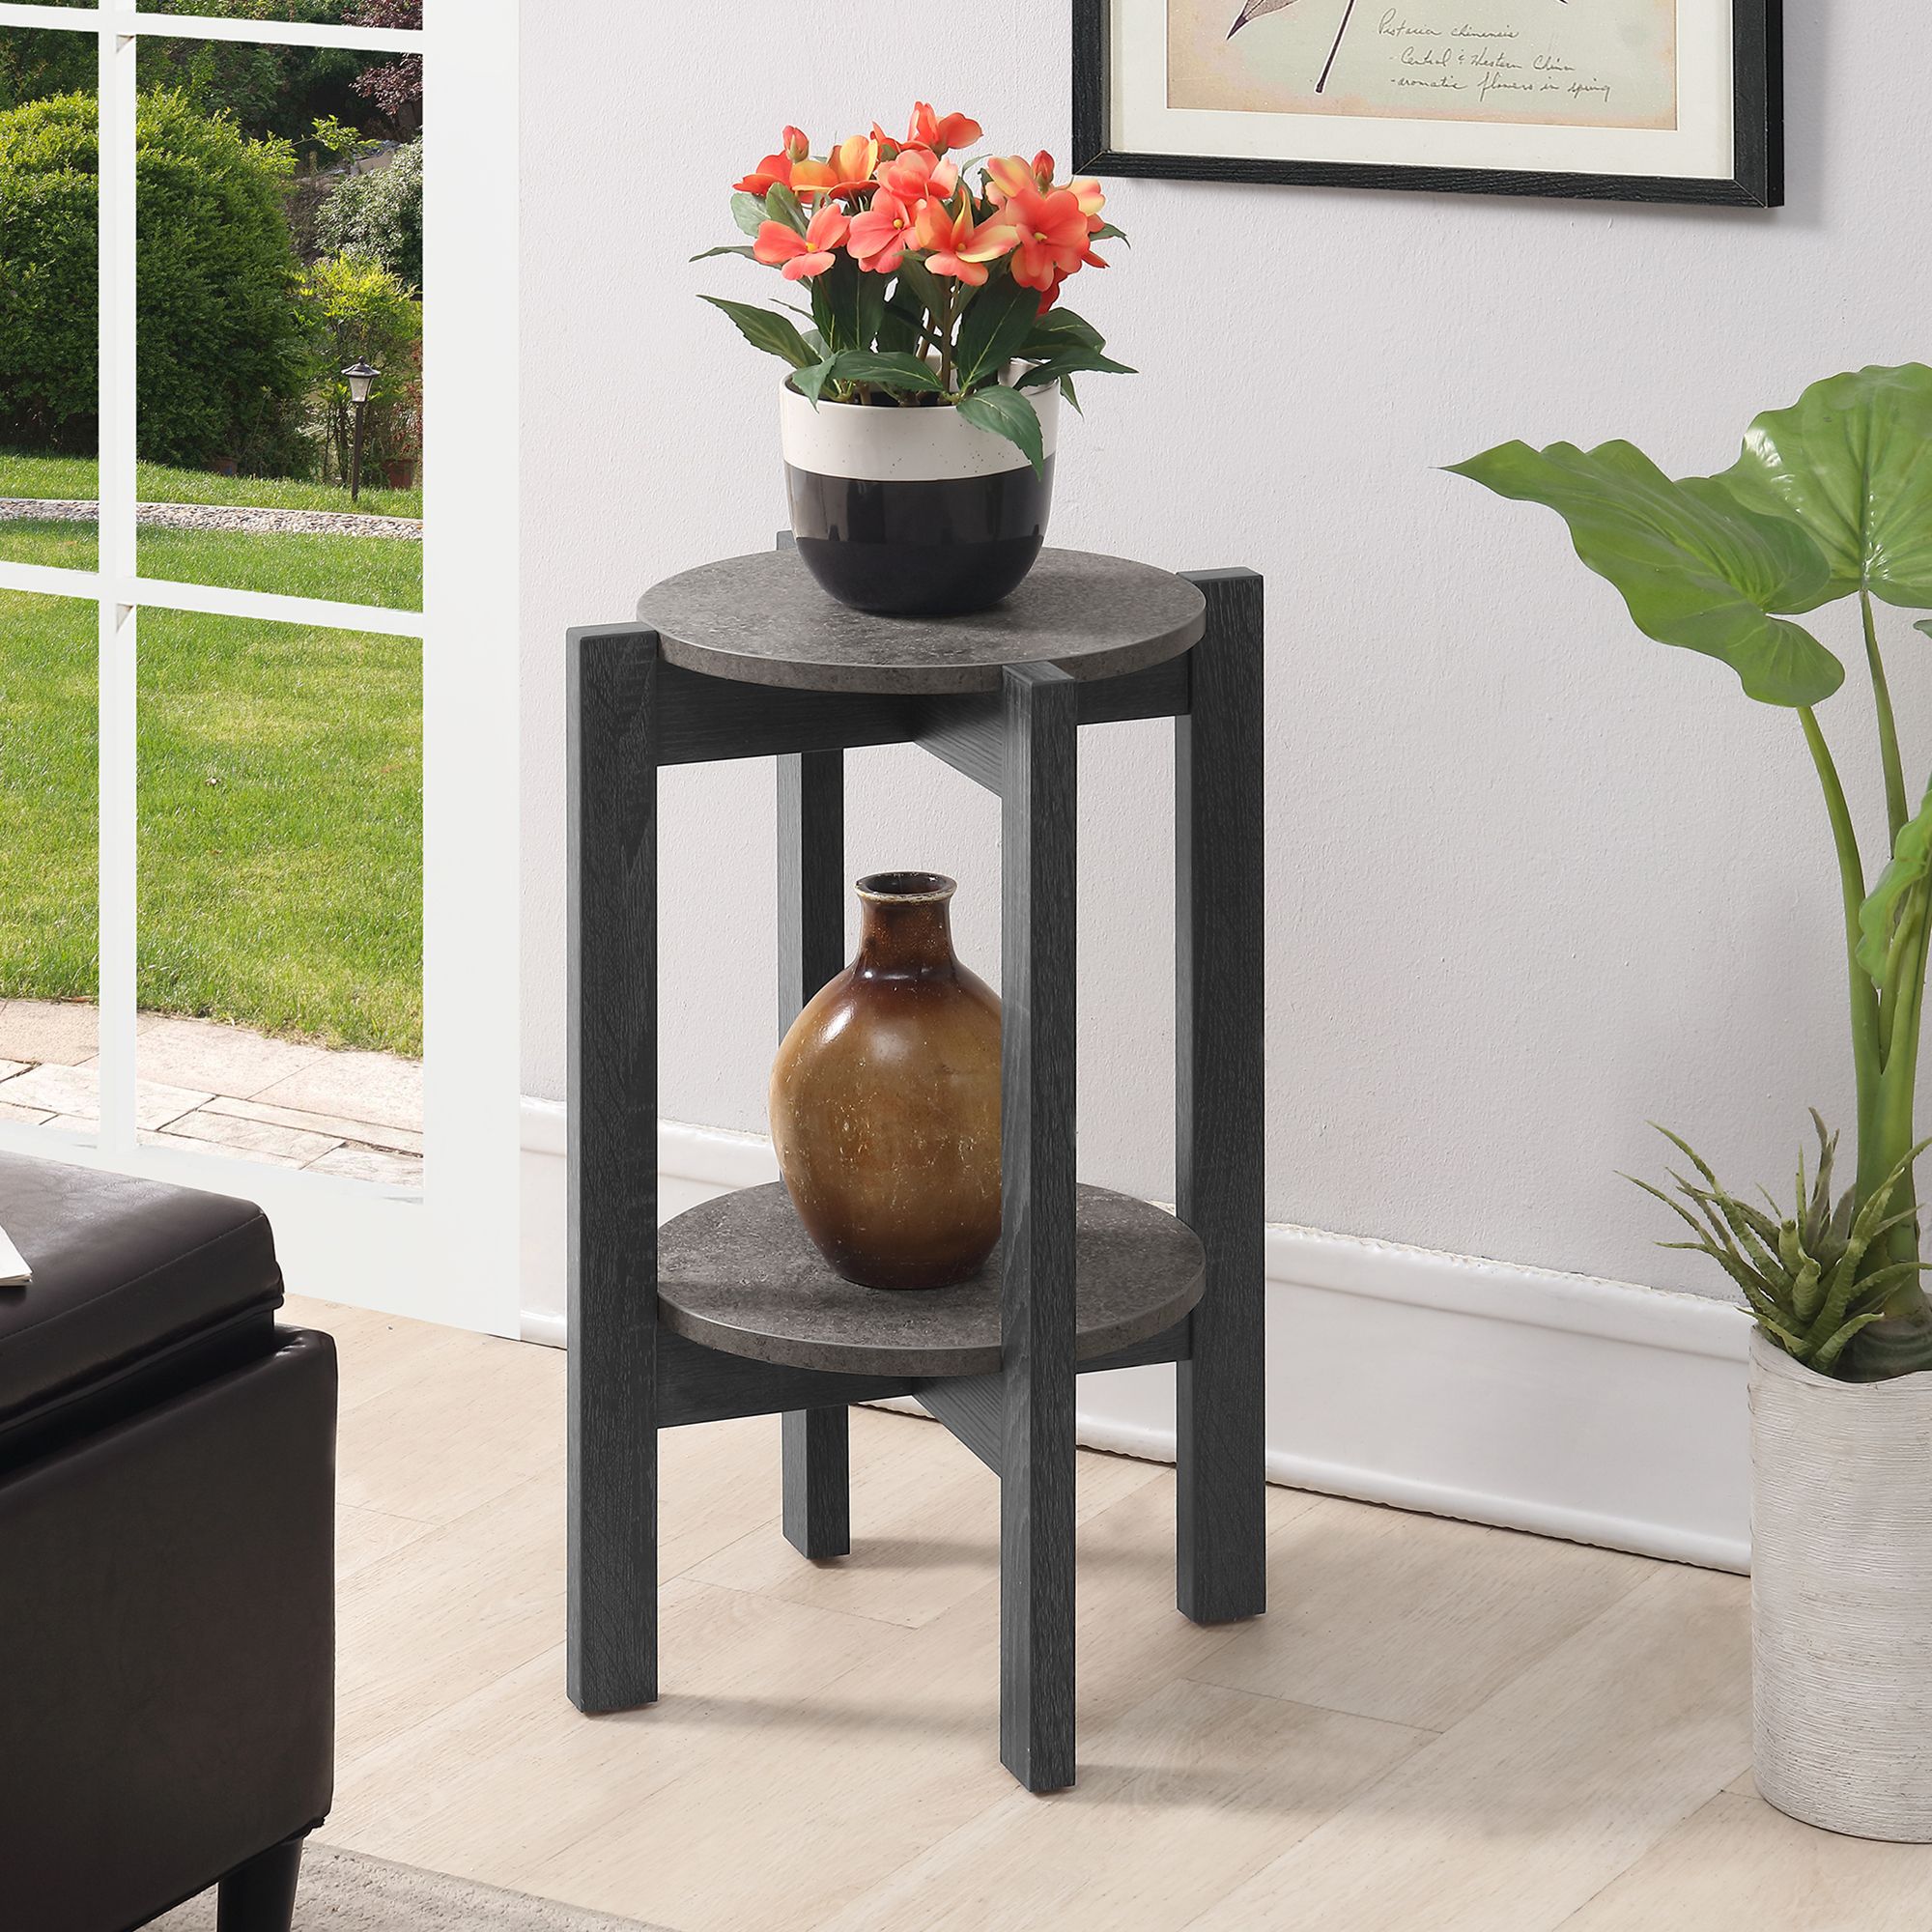 Fashionable Newport Medium 2 Tier Plant Stand, Faux Cement/weathered Gray – Walmart Intended For Weathered Gray Plant Stands (View 5 of 15)